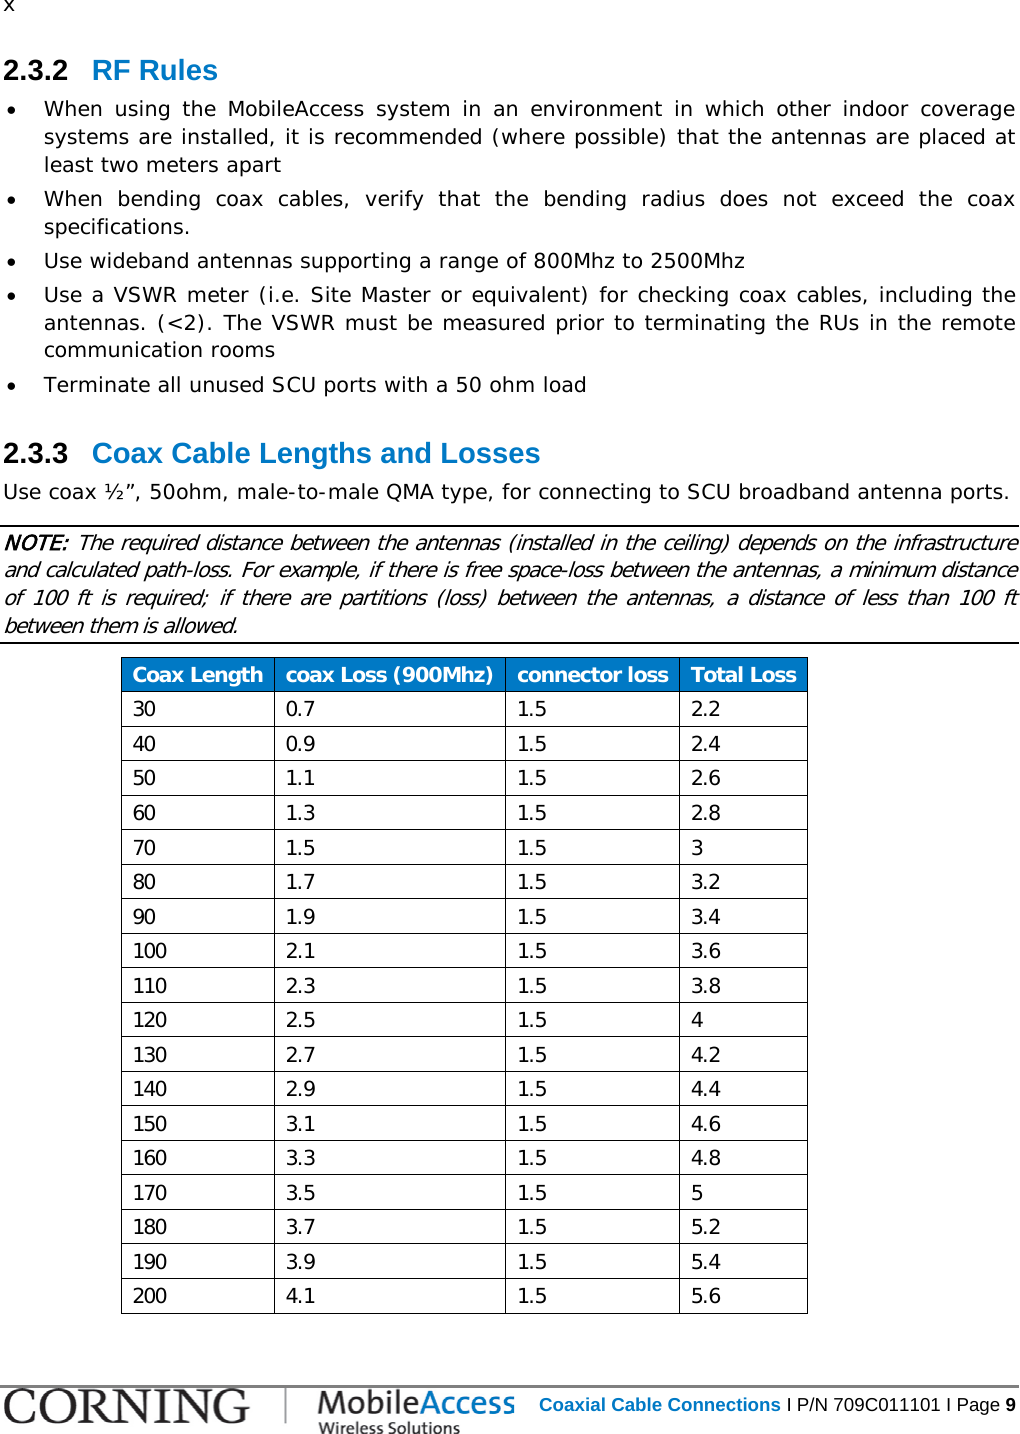   Coaxial Cable Connections I P/N 709C011101 I Page 9  x 2.3.2  RF Rules • When using the MobileAccess system in an environment in which other indoor coverage systems are installed, it is recommended (where possible) that the antennas are placed at least two meters apart  • When bending coax cables, verify that the bending radius does not exceed the coax specifications. • Use wideband antennas supporting a range of 800Mhz to 2500Mhz  • Use a VSWR meter (i.e. Site Master or equivalent) for checking coax cables, including the antennas. (&lt;2). The VSWR must be measured prior to terminating the RUs in the remote communication rooms • Terminate all unused SCU ports with a 50 ohm load  2.3.3  Coax Cable Lengths and Losses Use coax ½”, 50ohm, male-to-male QMA type, for connecting to SCU broadband antenna ports. NOTE: The required distance between the antennas (installed in the ceiling) depends on the infrastructure and calculated path-loss. For example, if there is free space-loss between the antennas, a minimum distance of 100 ft is required; if there are partitions (loss) between the antennas, a distance of less than 100 ft between them is allowed. Coax Length coax Loss (900Mhz) connector loss Total Loss 30 0.7 1.5 2.2 40 0.9 1.5 2.4 50 1.1 1.5 2.6 60 1.3 1.5 2.8 70 1.5 1.5  3 80 1.7 1.5 3.2 90 1.9 1.5 3.4 100 2.1 1.5 3.6 110 2.3 1.5 3.8 120 2.5 1.5  4 130 2.7 1.5 4.2 140 2.9 1.5 4.4 150 3.1 1.5 4.6 160 3.3 1.5 4.8 170 3.5 1.5  5 180 3.7 1.5 5.2 190 3.9 1.5 5.4 200 4.1 1.5 5.6 